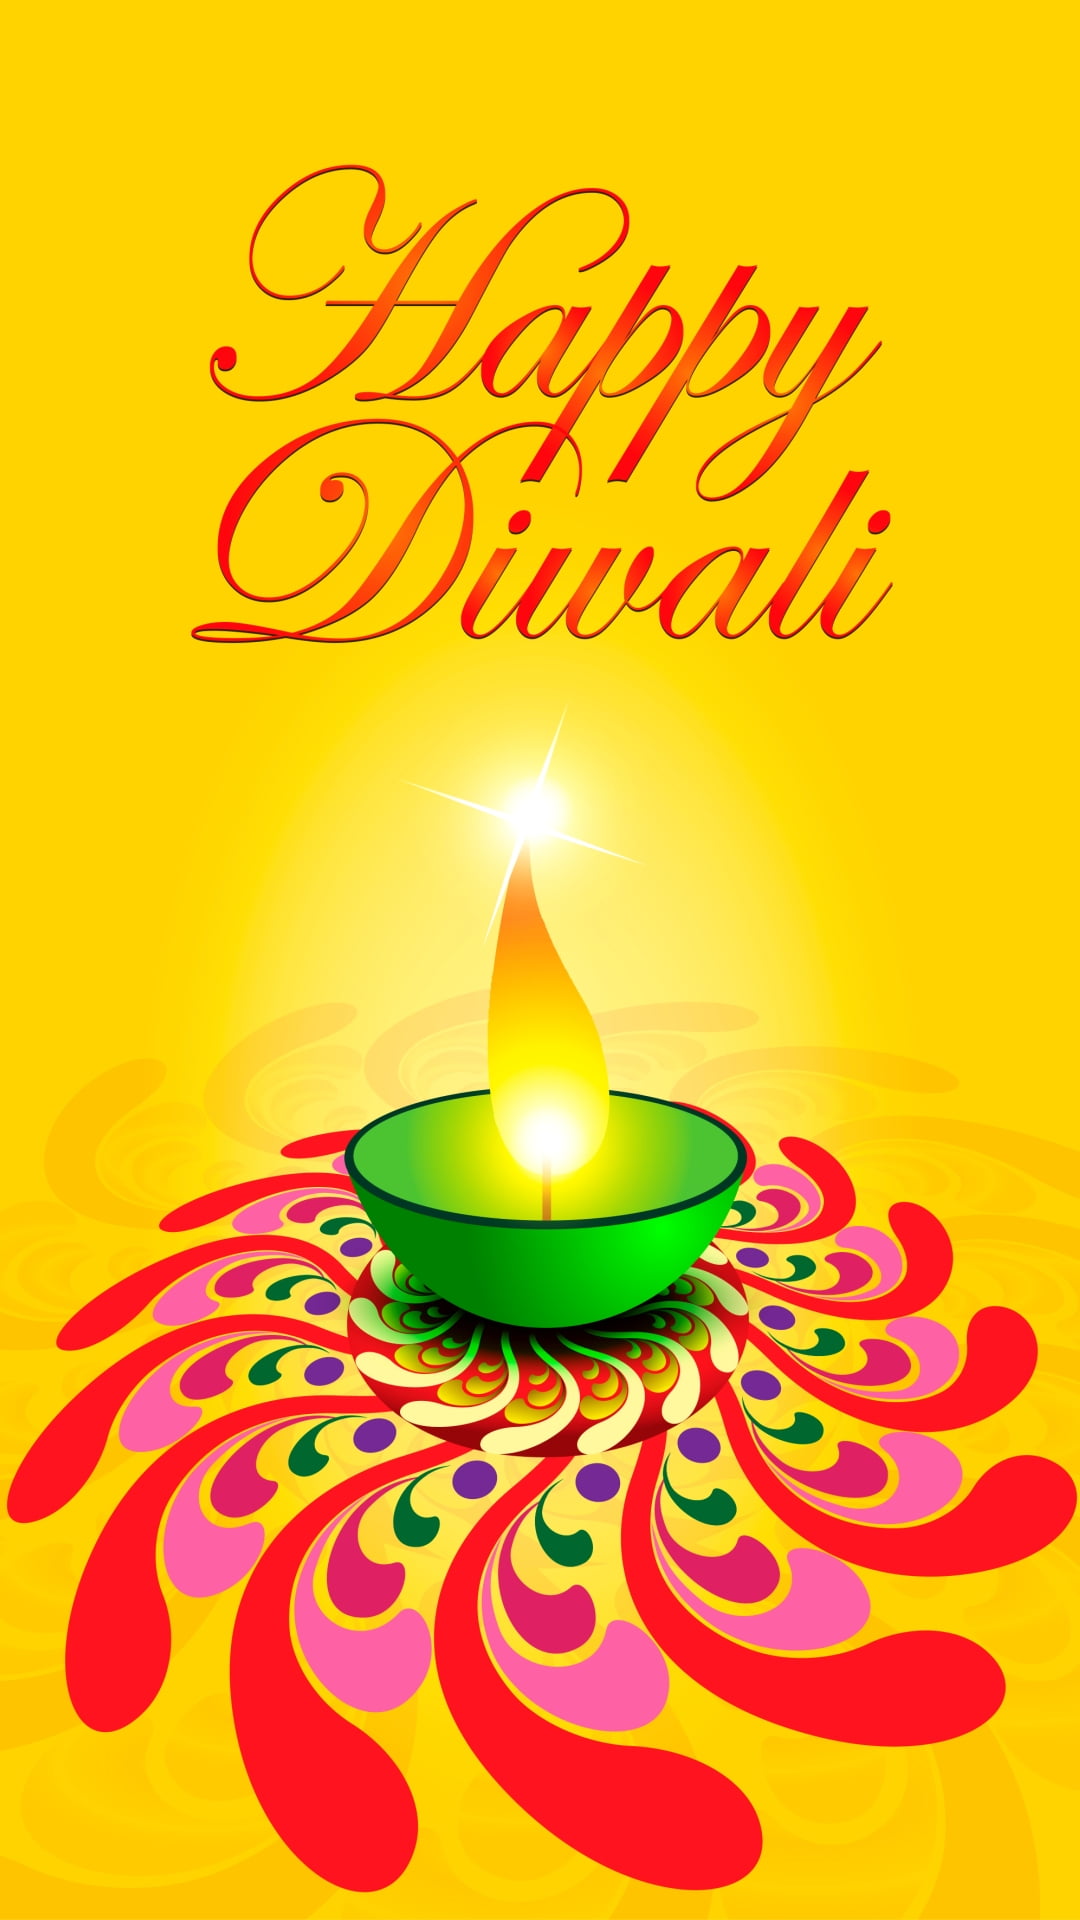 Diwali Card Vector, tealight candle illustration with happy diwali text overlay